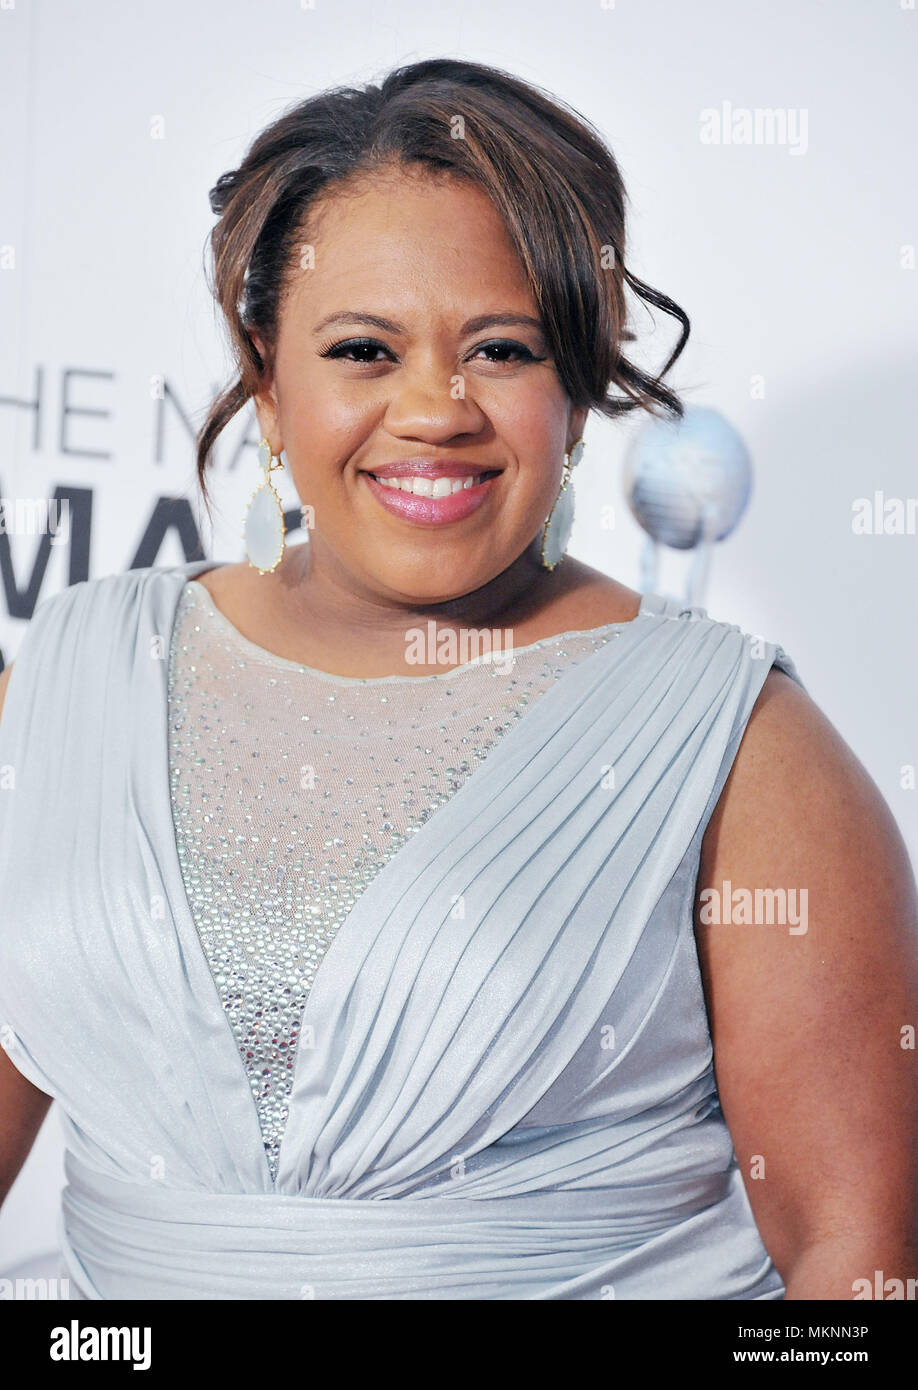 Chandra Wilson  at the 44th Ann. NAACP Awards 2013 at the Shrine Auditorium in Los Angeles.Chandra Wilson  062 Red Carpet Event, Vertical, USA, Film Industry, Celebrities,  Photography, Bestof, Arts Culture and Entertainment, Topix Celebrities fashion /  Vertical, Best of, Event in Hollywood Life - California,  Red Carpet and backstage, USA, Film Industry, Celebrities,  movie celebrities, TV celebrities, Music celebrities, Photography, Bestof, Arts Culture and Entertainment,  Topix, headshot, vertical, one person,, from the year , 2013, inquiry tsuni@Gamma-USA.com Stock Photo